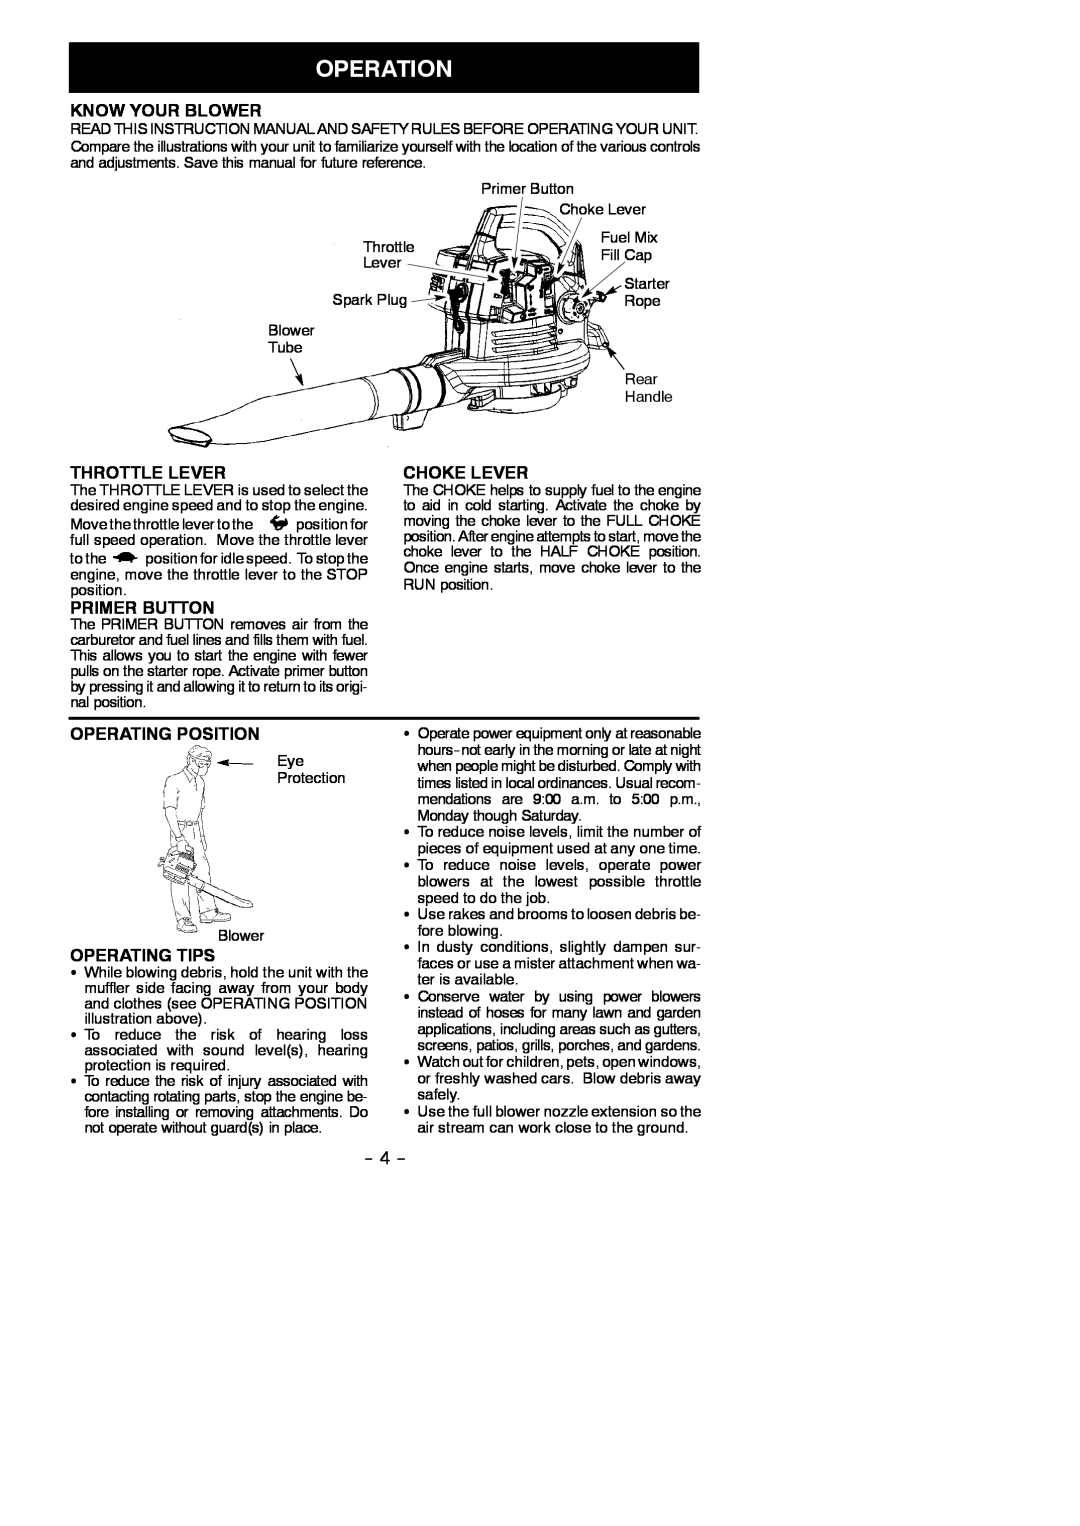 Weed Eater 530165303-01 Operation, Know Your Blower, Throttle Lever, Primer Button, Choke Lever, Operating Position 